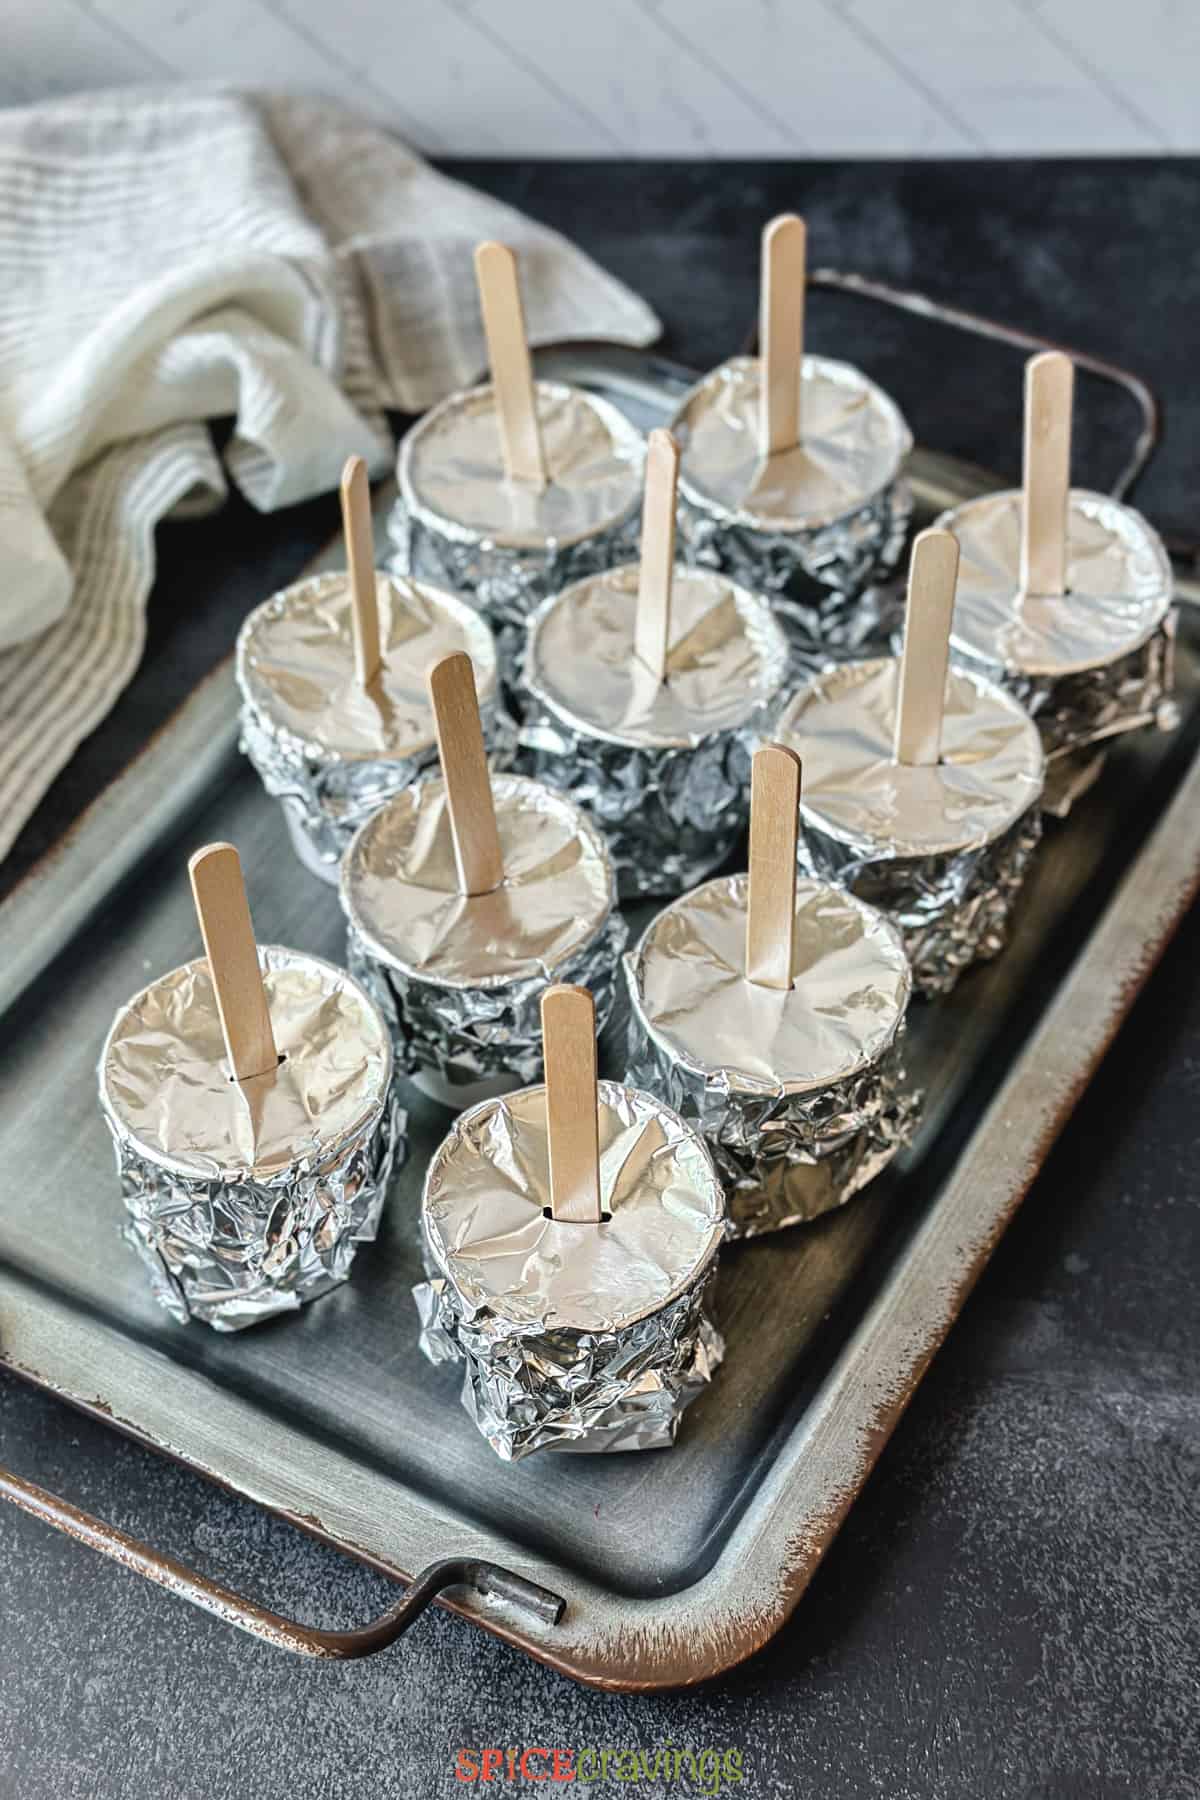 Small cups covered with aluminum foil with ice cream sticks in the middle.